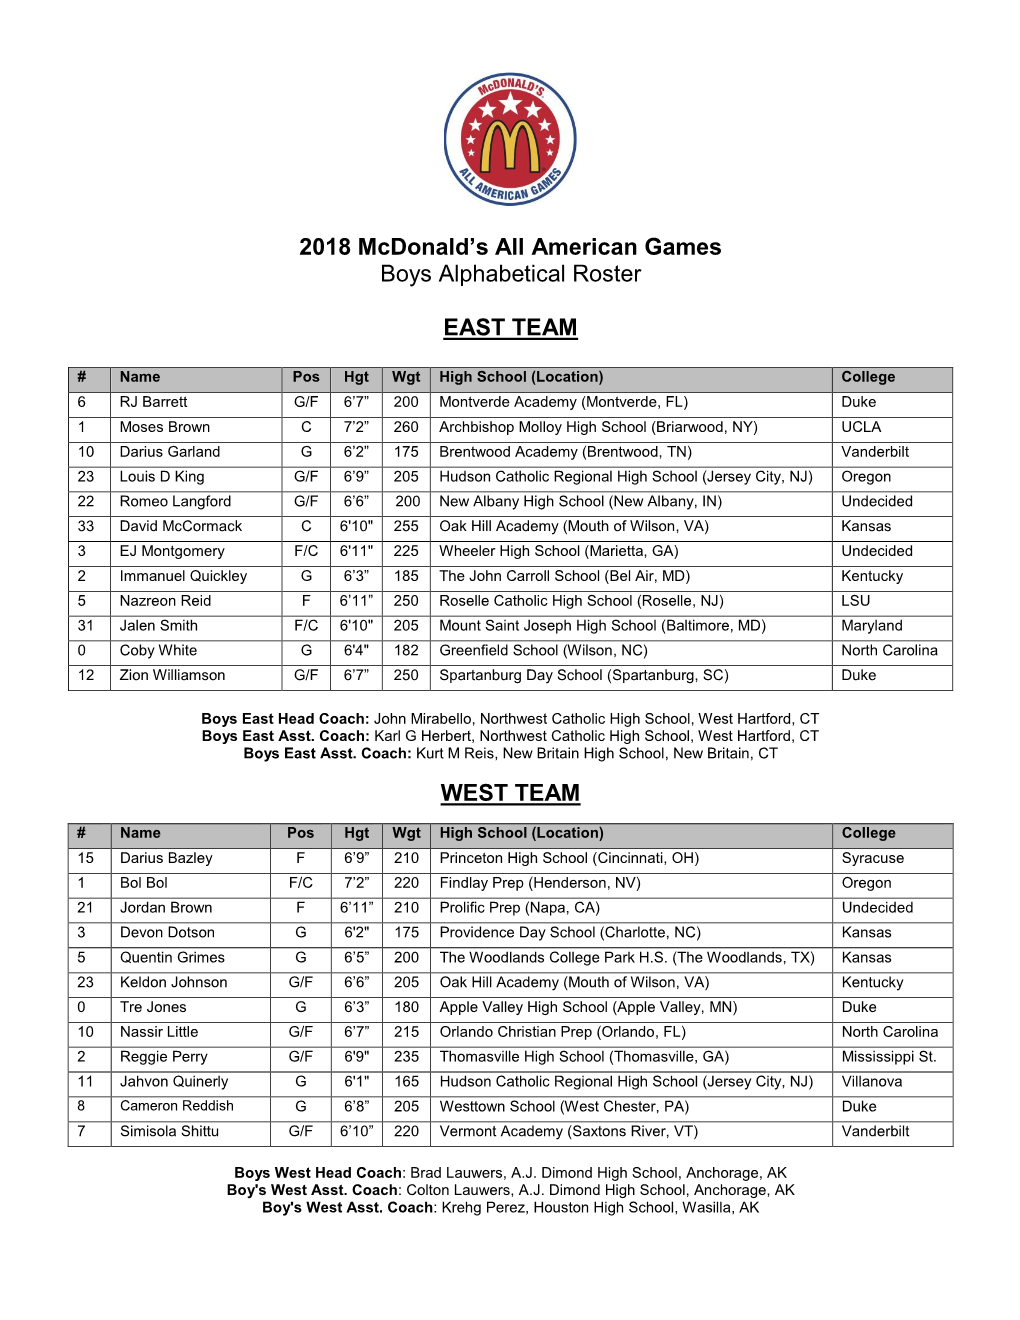 2018 Mcdonald's All American Games Boys Alphabetical Roster EAST